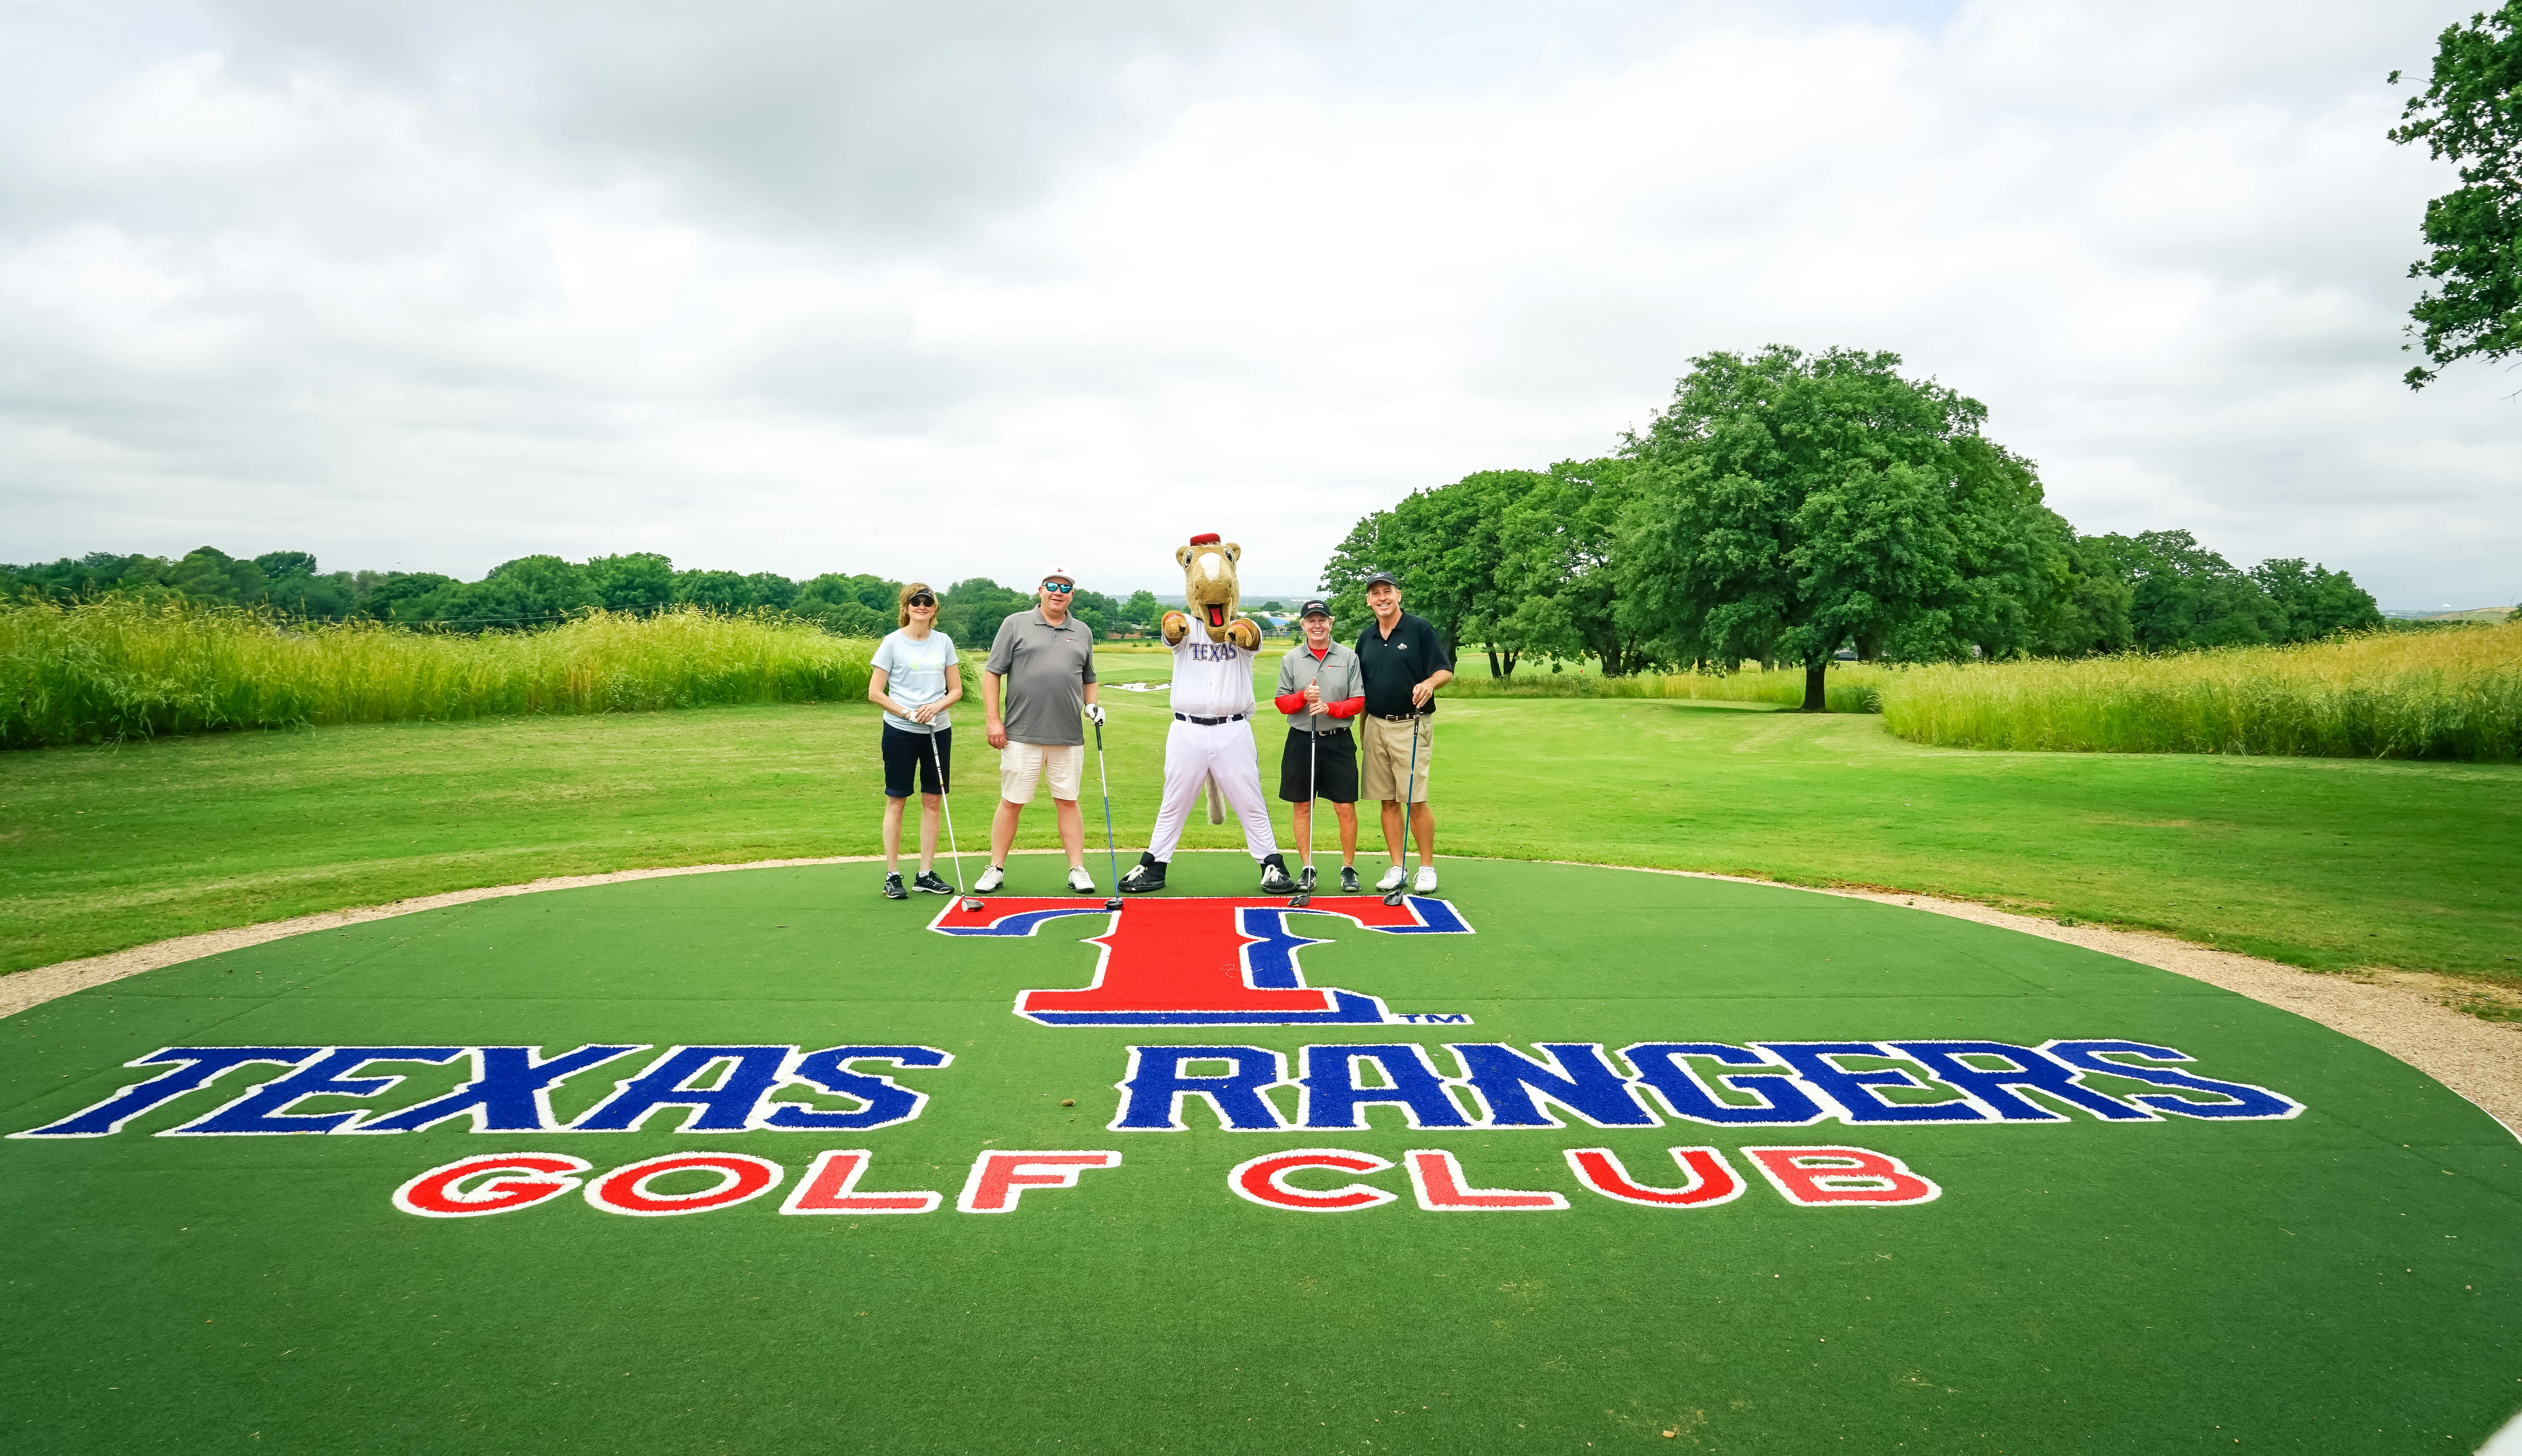 Golf Inc.: Texas Rangers Golf Club Named Second Place for Renovation of the Year